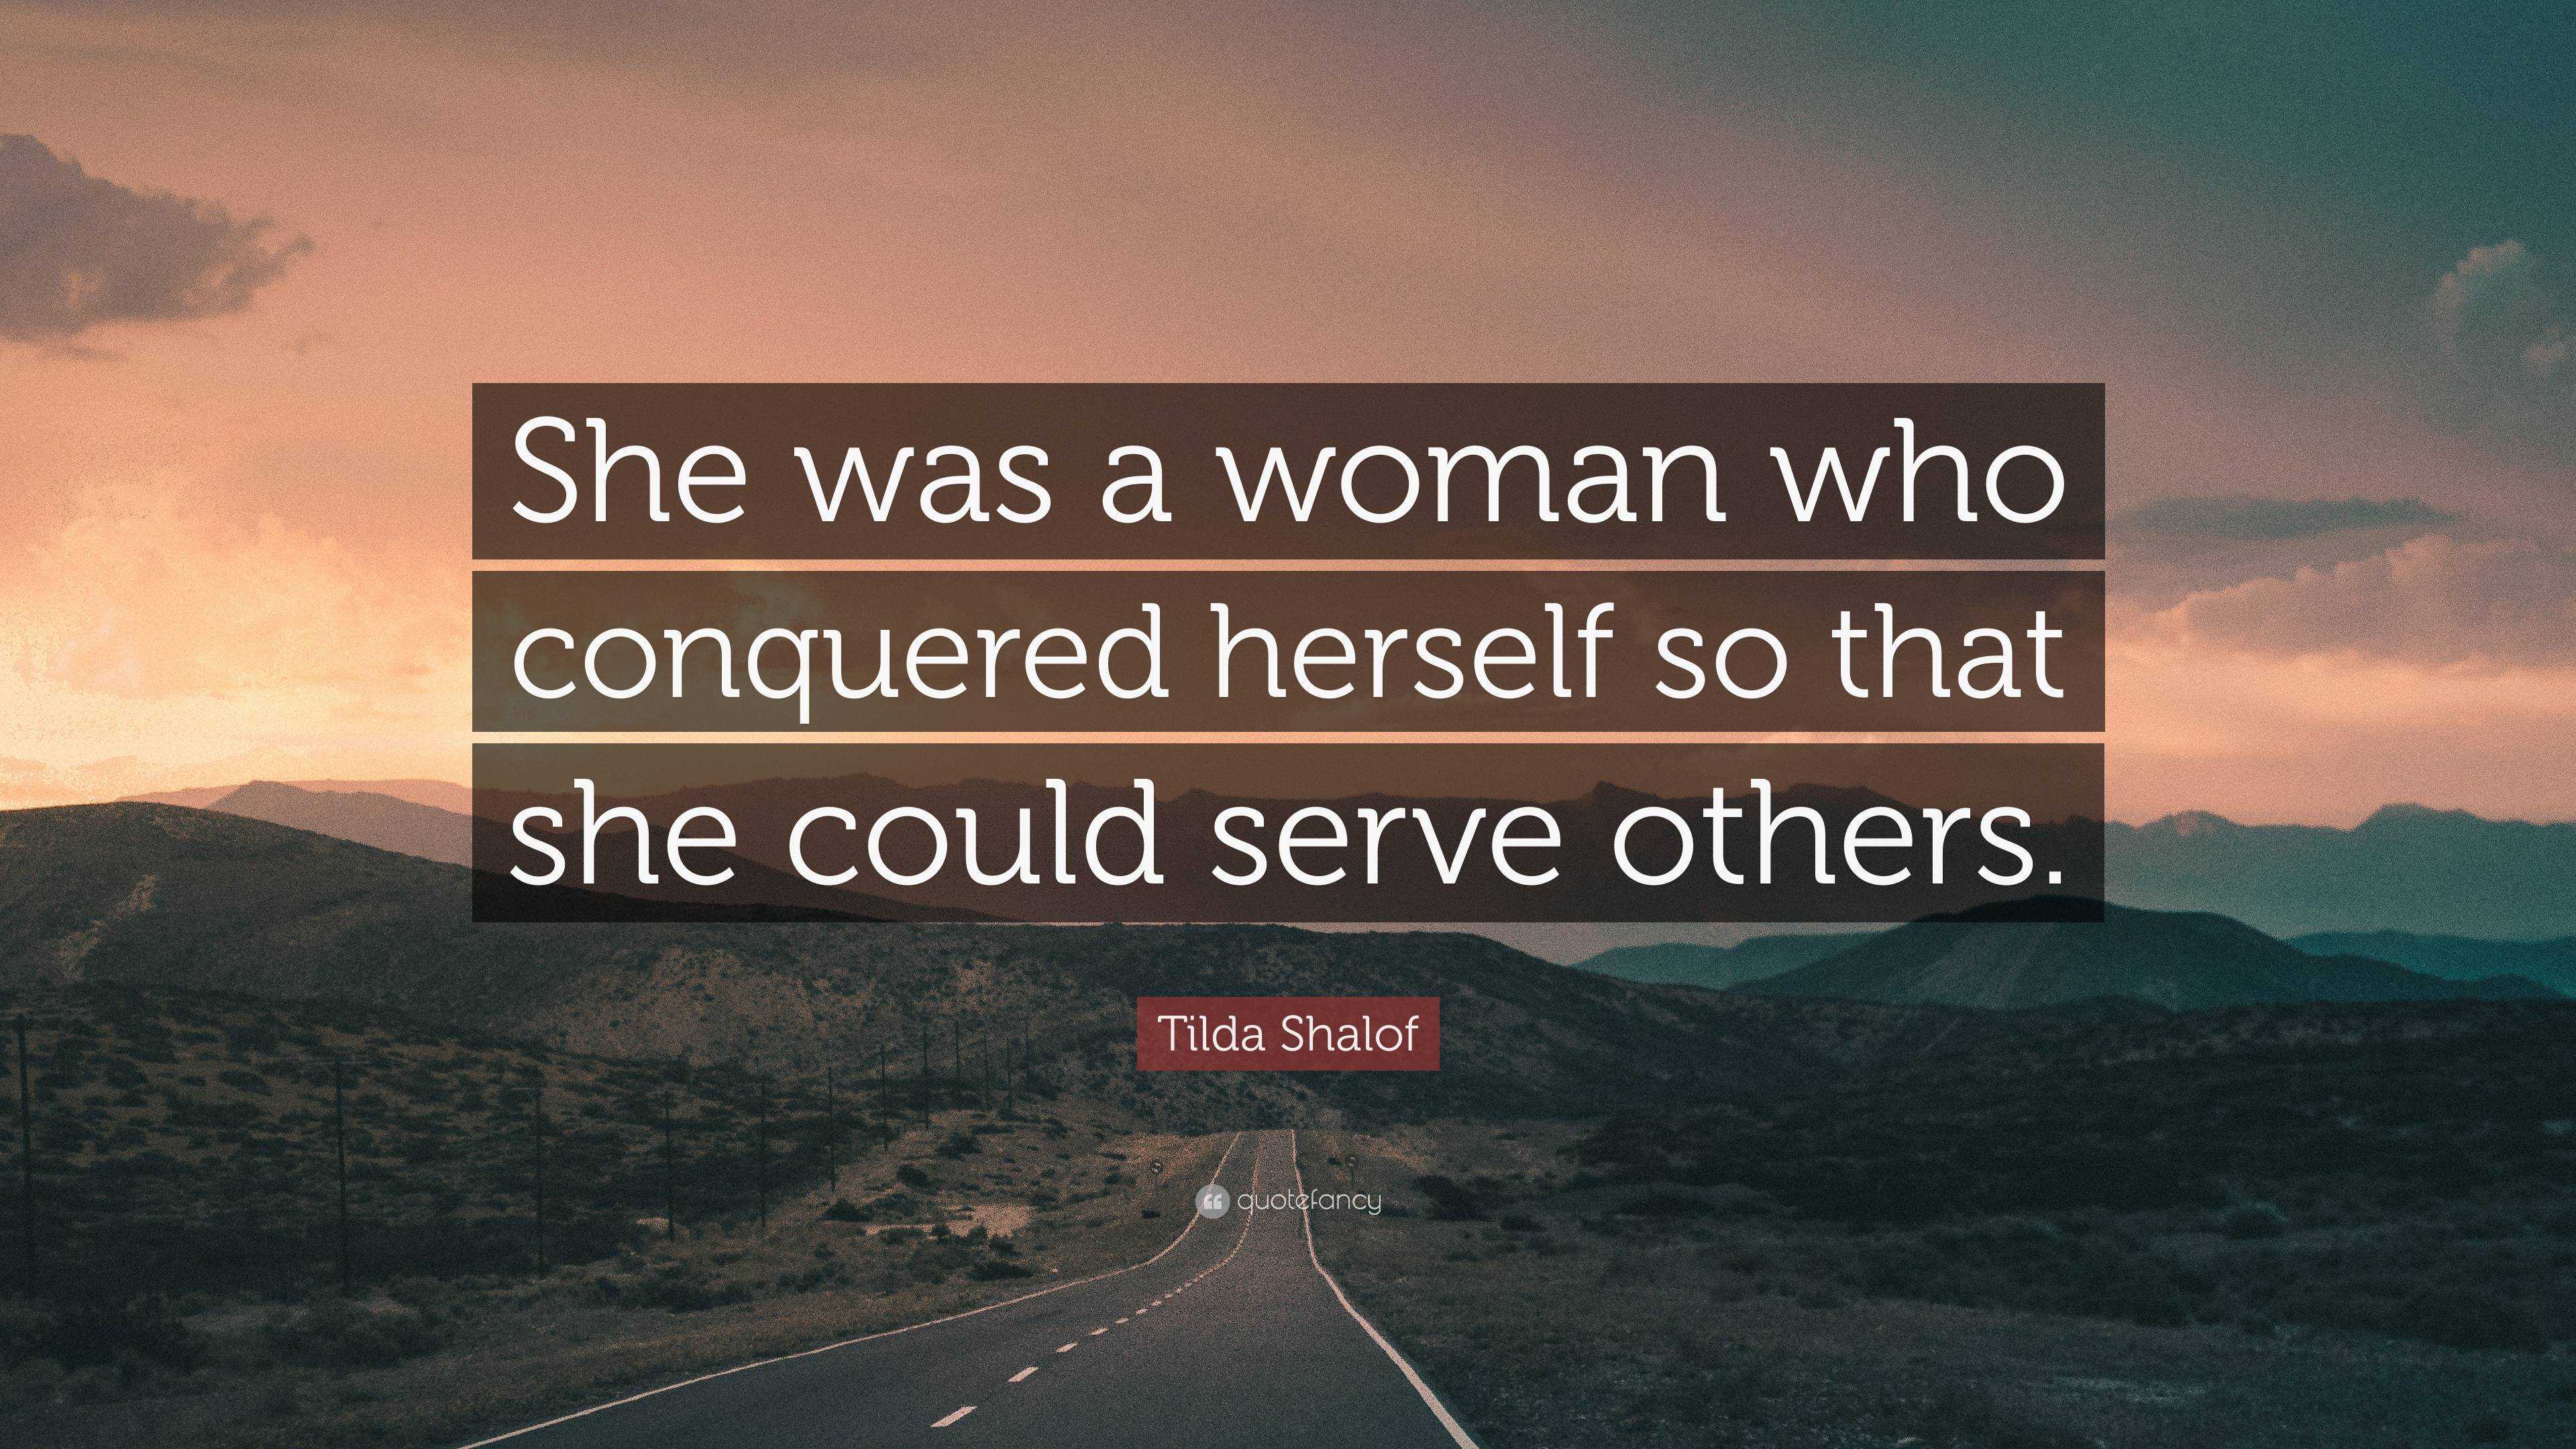 Tilda Shalof Quote: “She was a woman who conquered herself so that she ...